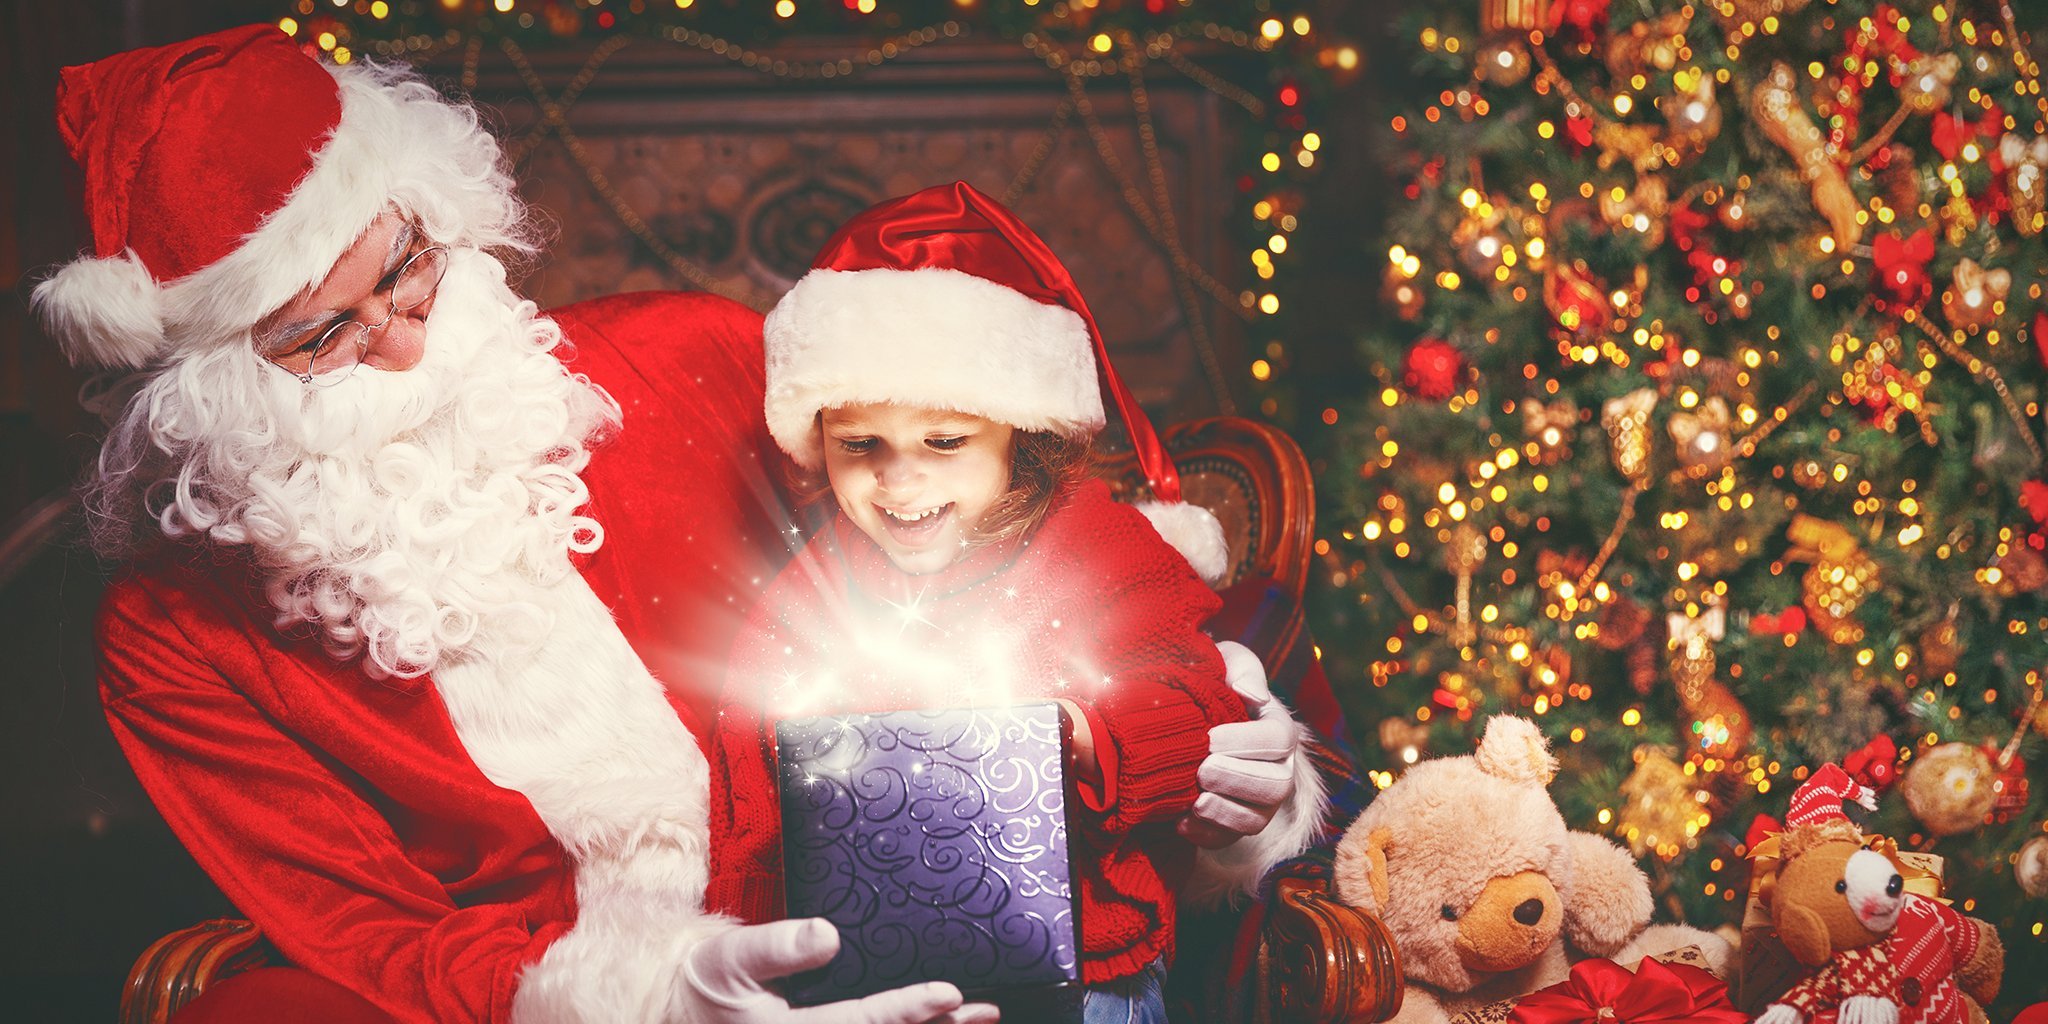 Magical holiday moments with Santa Claus and vivacious play for children